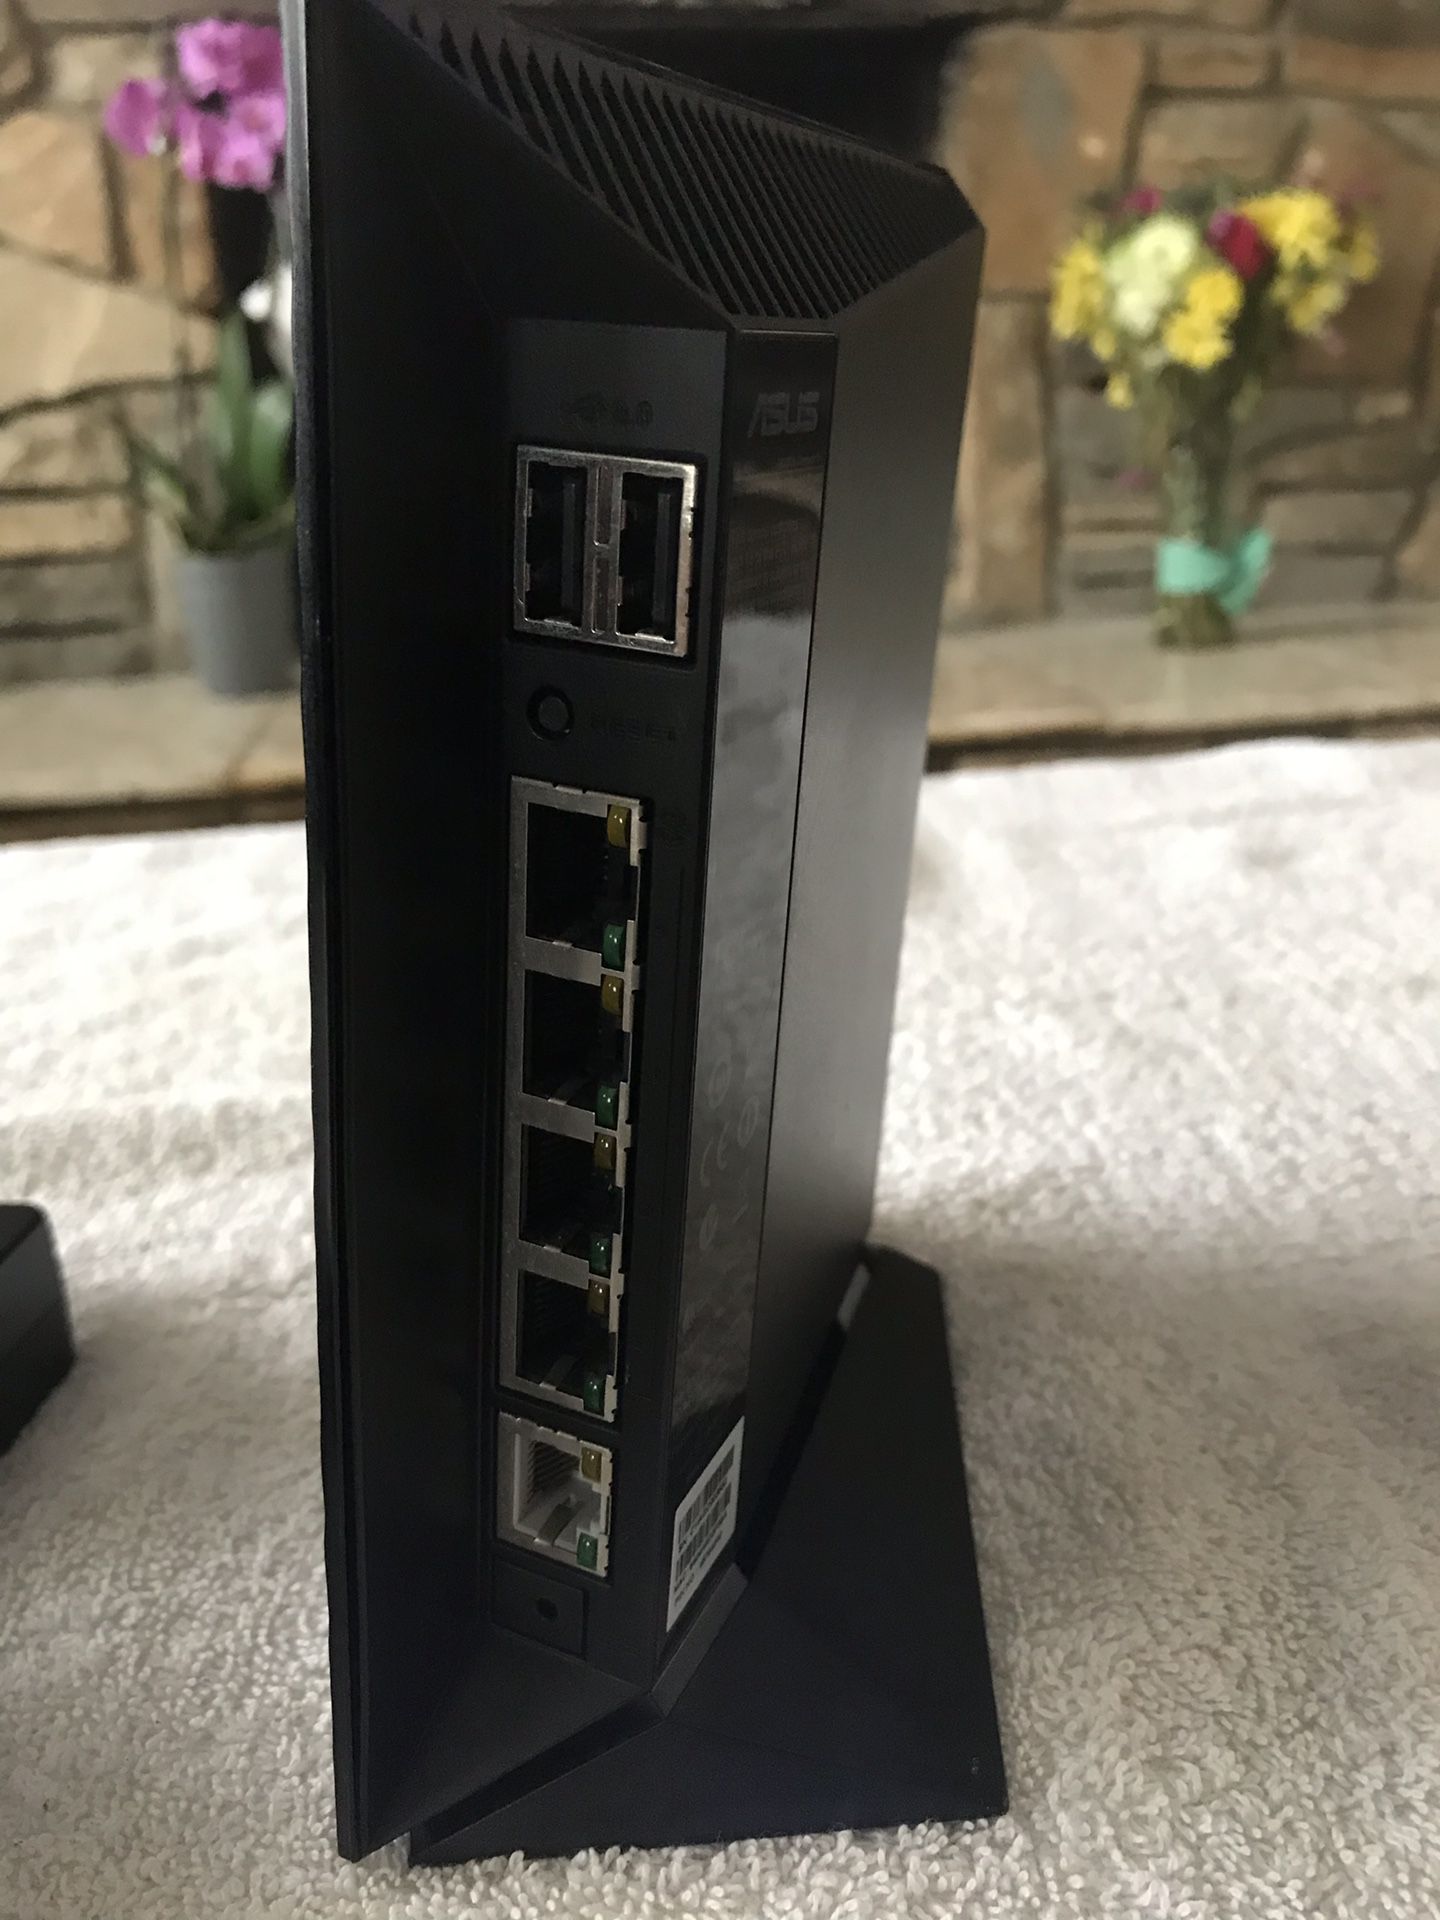 Asus RT-NT56U Router